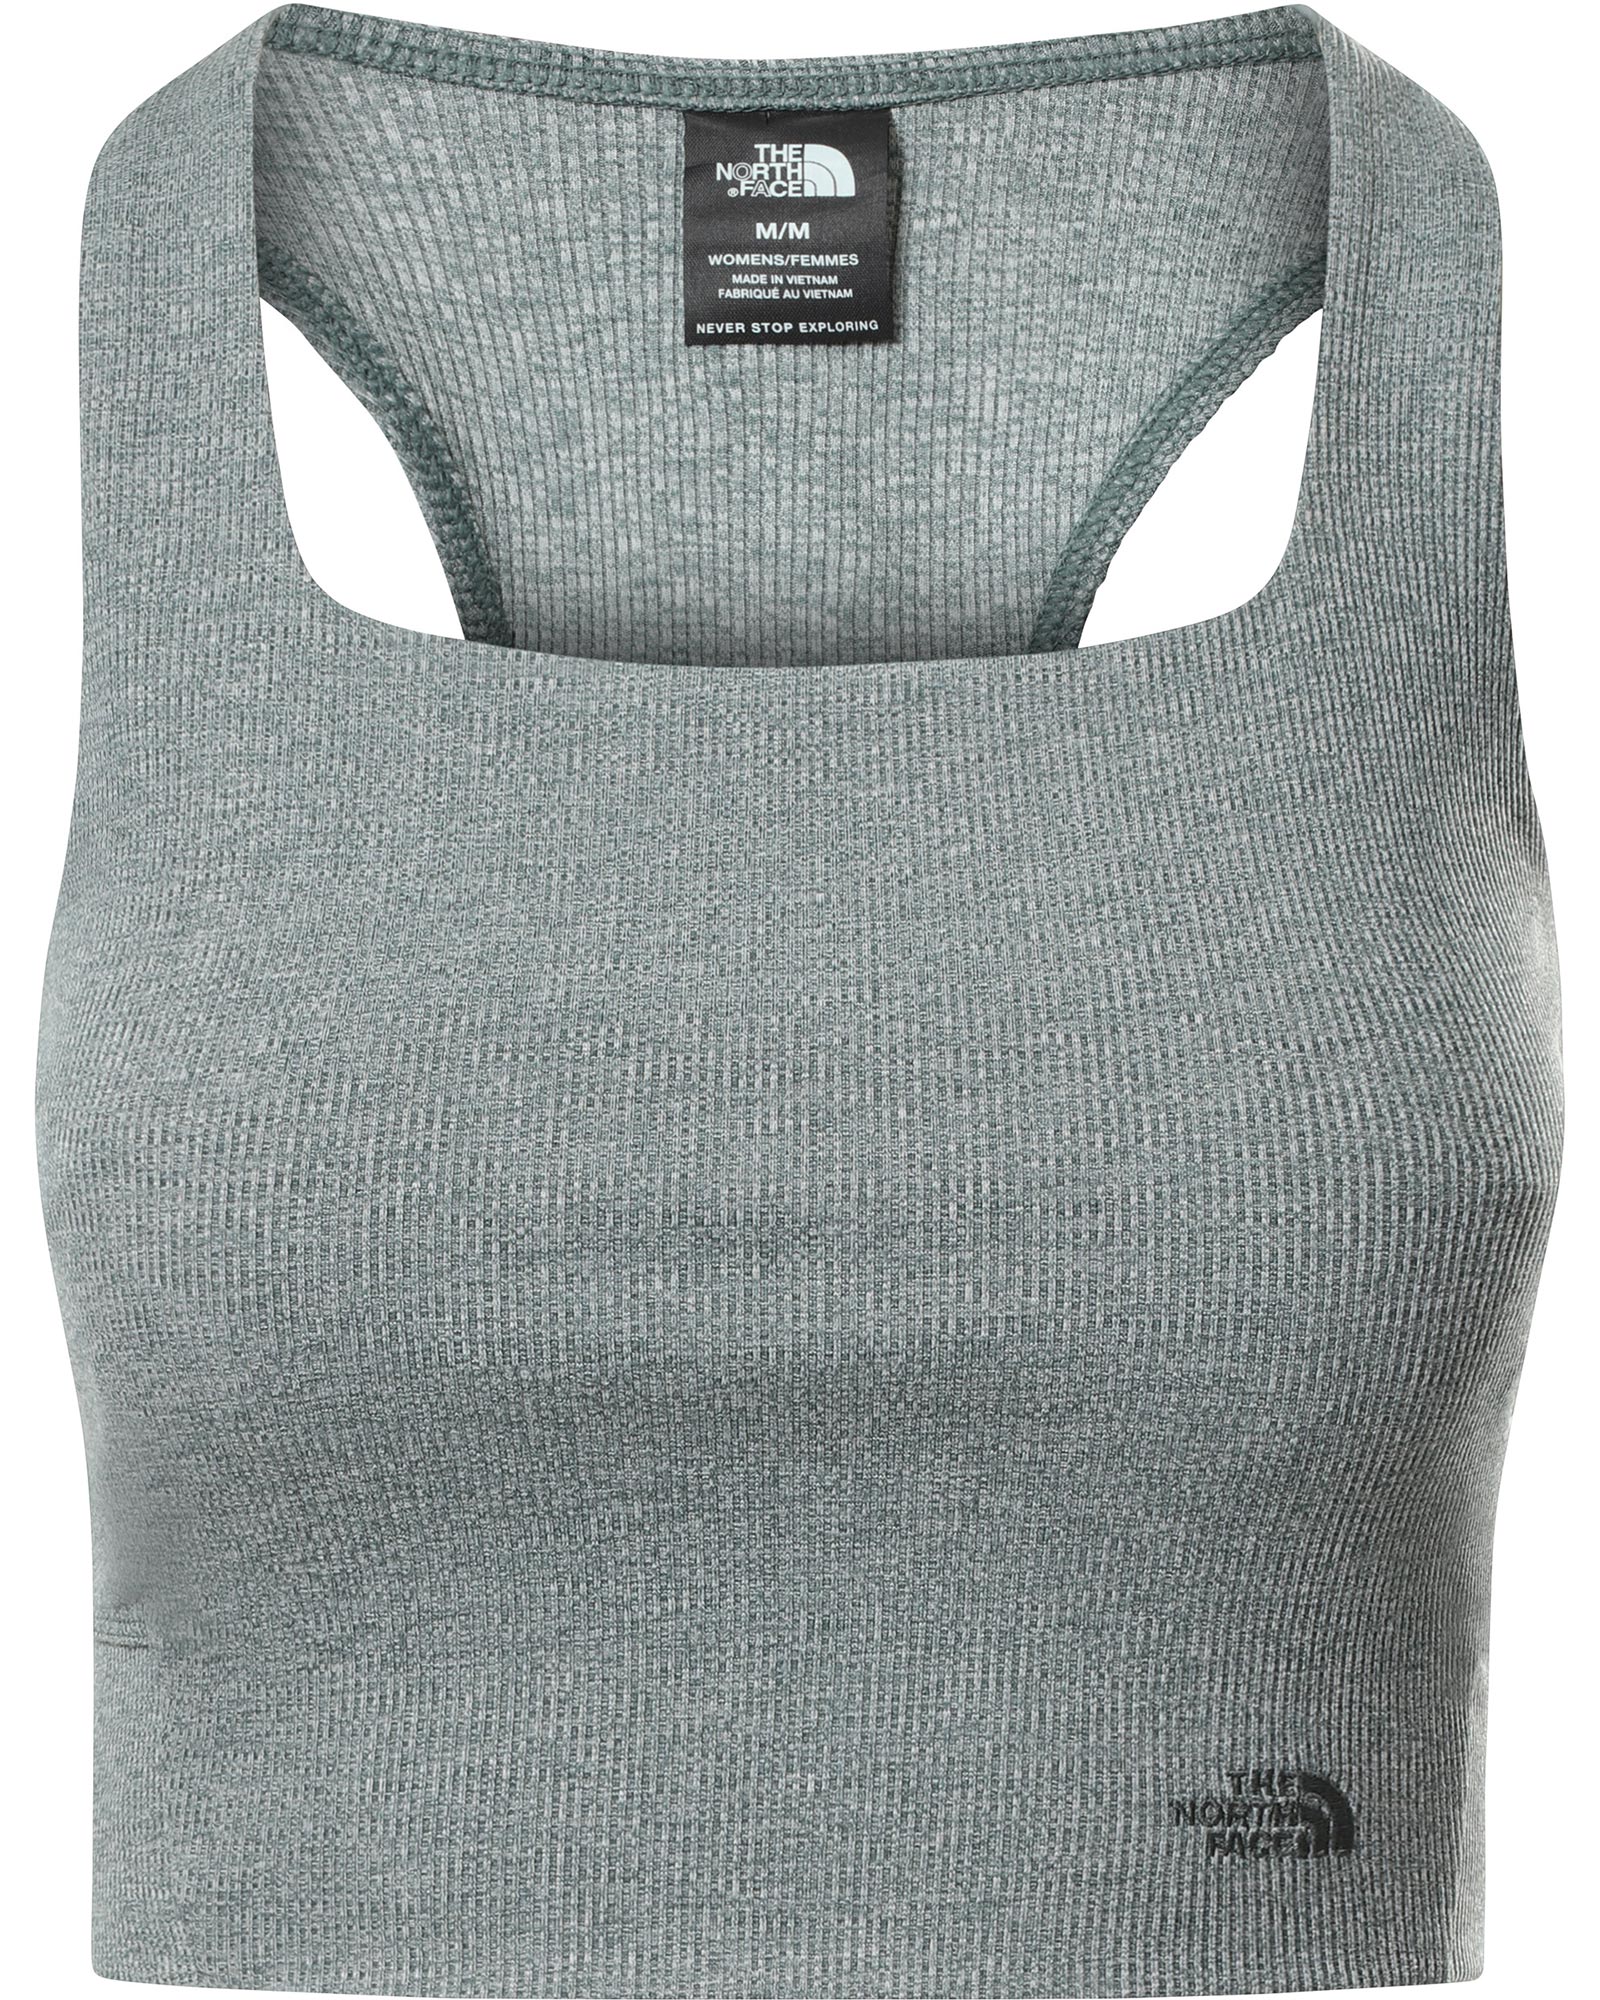 The North Face AT EA Rib Knit Women’s Tank - Balsam Green Heather XS